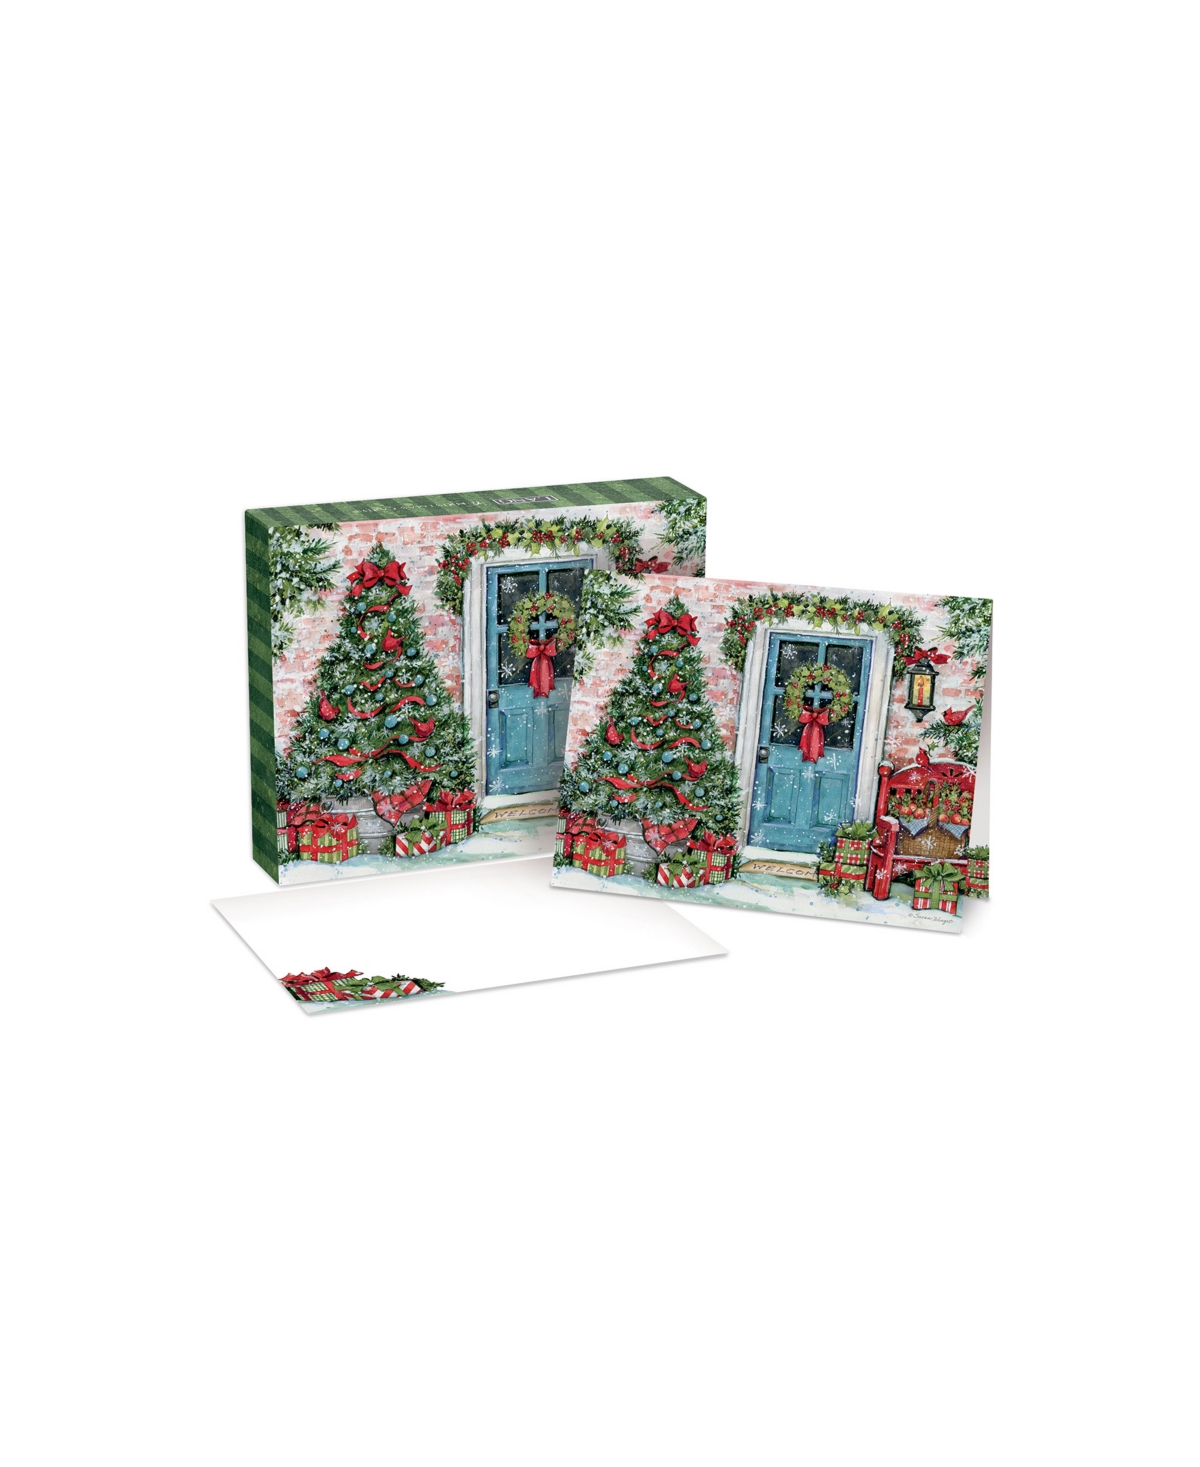 Greenery Greetings Boxed Christmas Cards - Multi